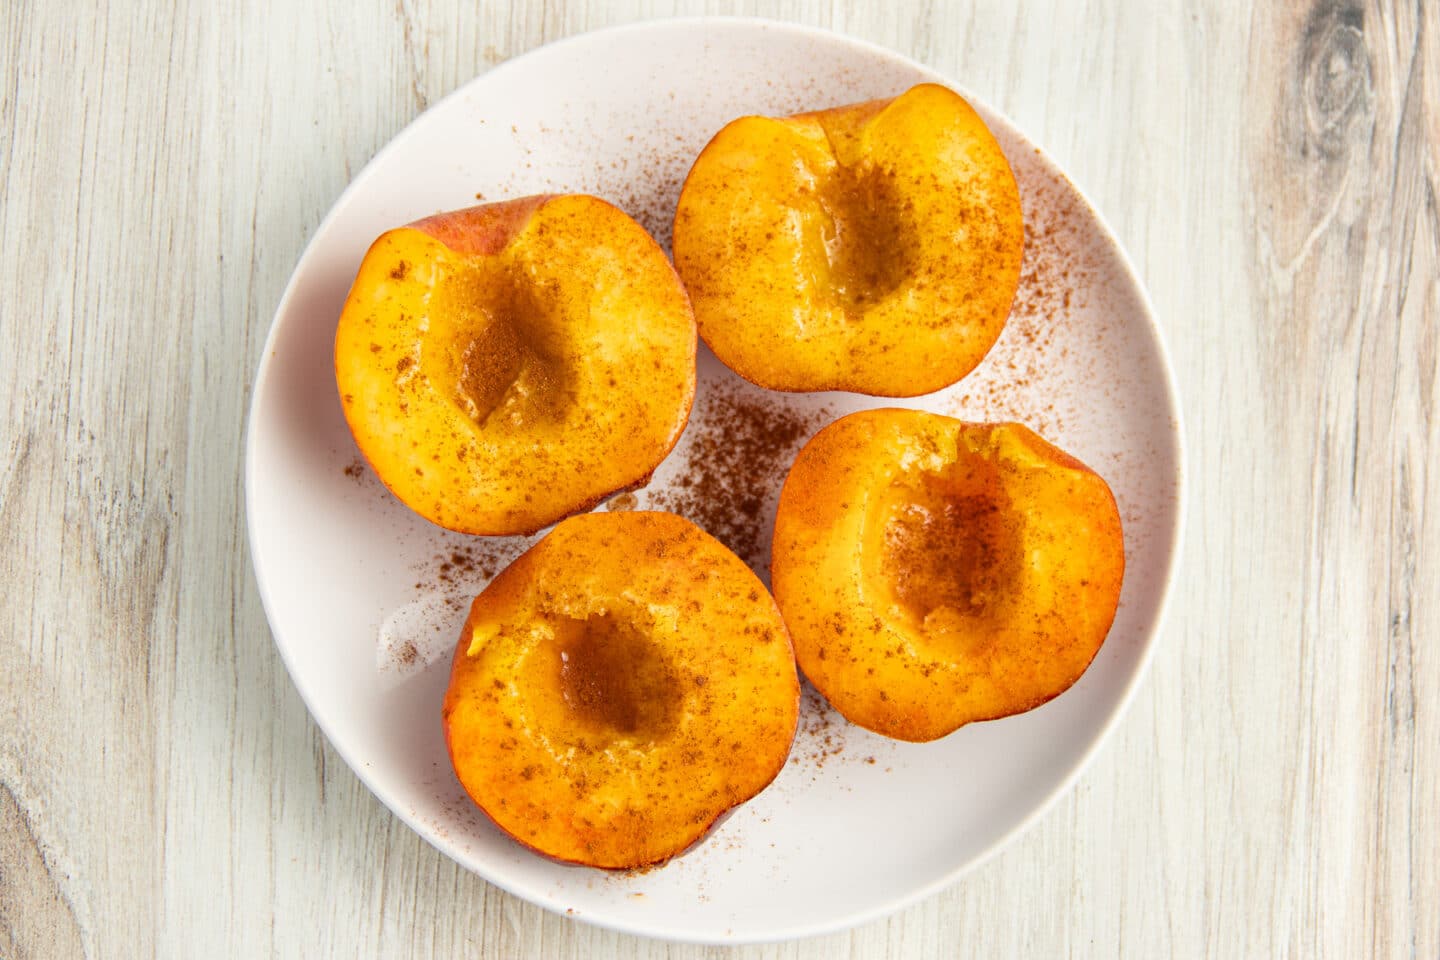 Picture of 4 peach halves seasoned with honey and cinnamon.